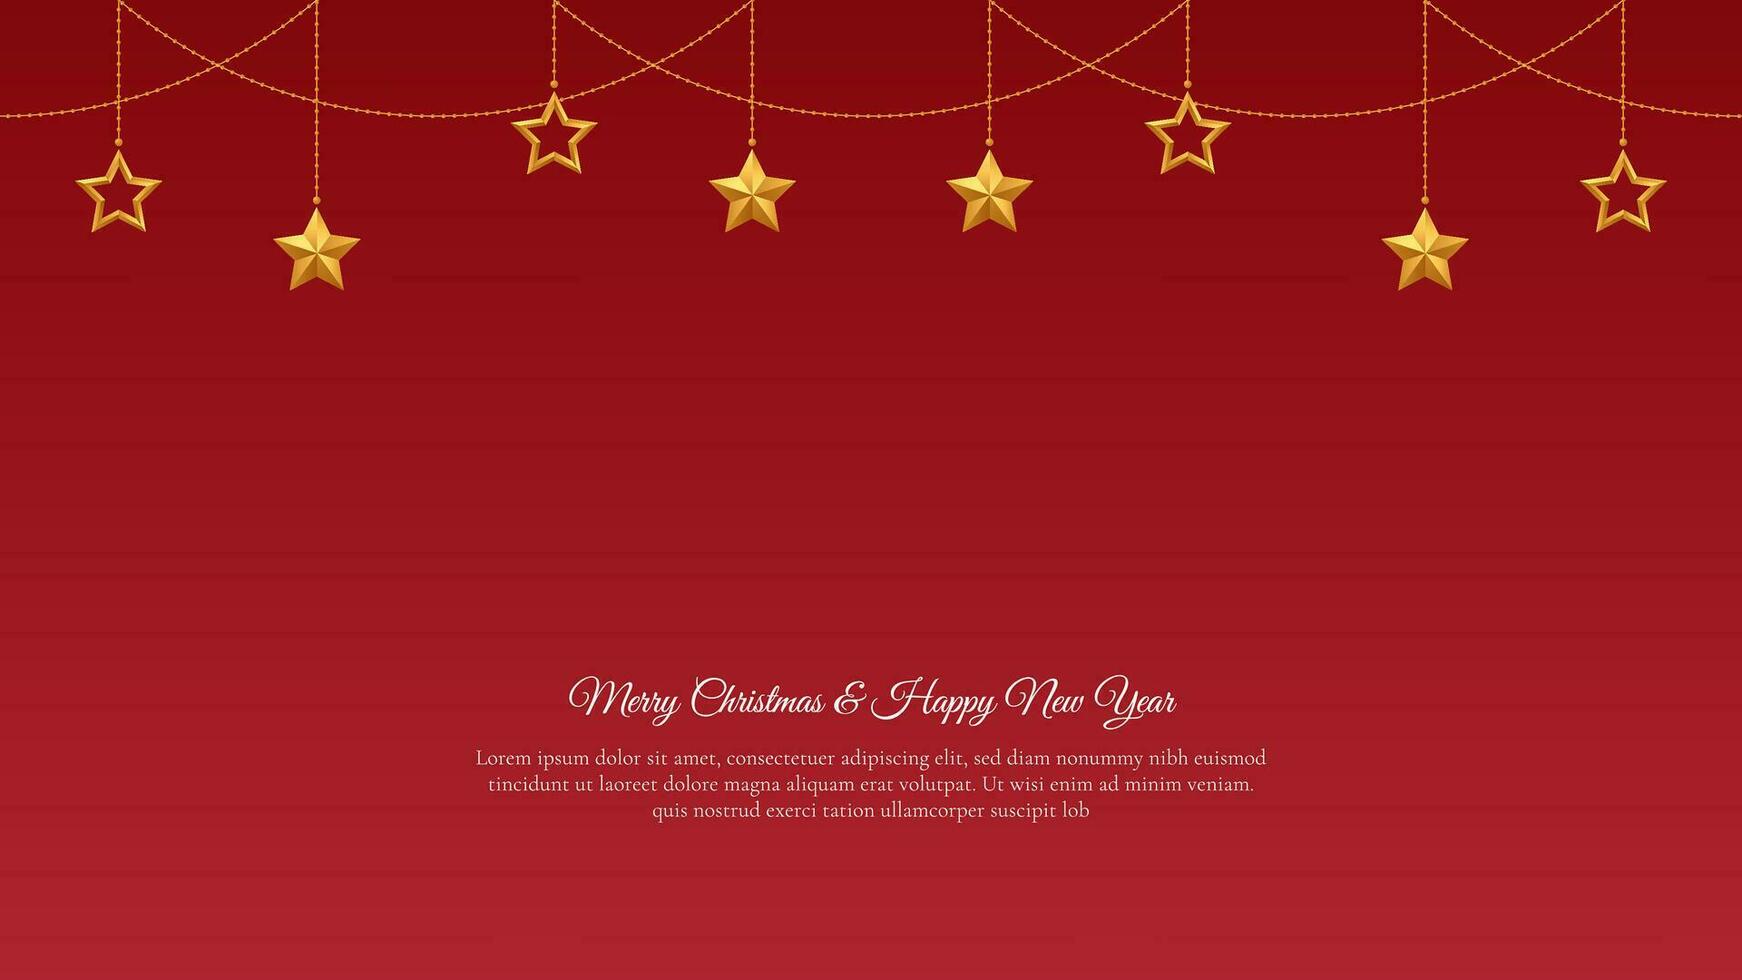 Simple Dark Red Christmas Greeting Background With Hanging Golden Stars Decoration vector